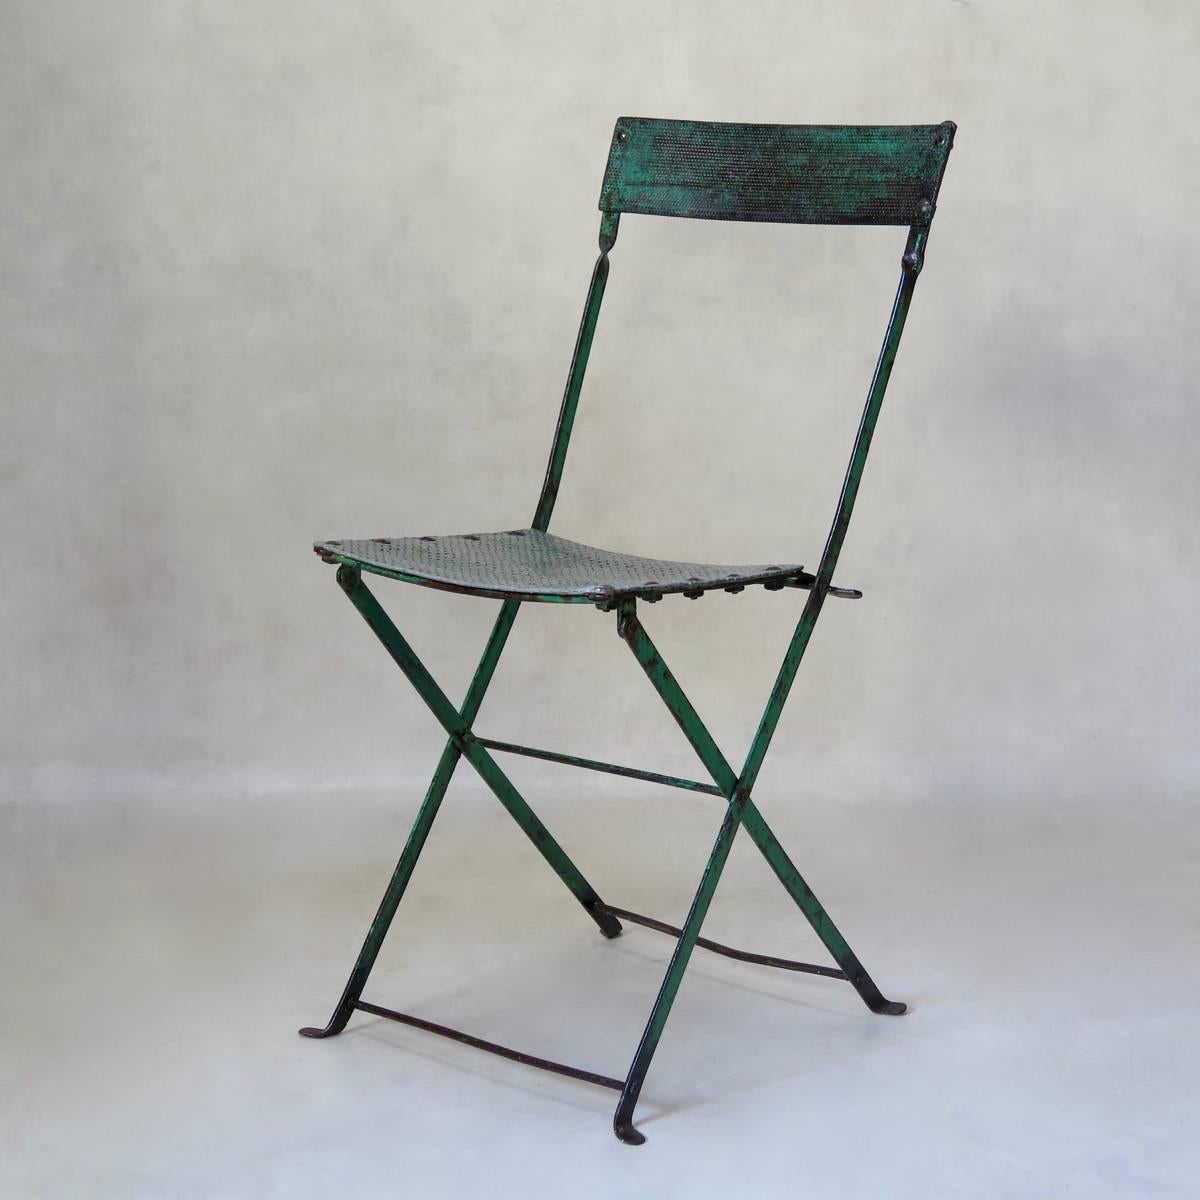 Very lovely folding iron chair with a gorgeous green patina. The seat and backrest are made of perforated aluminium sheet.